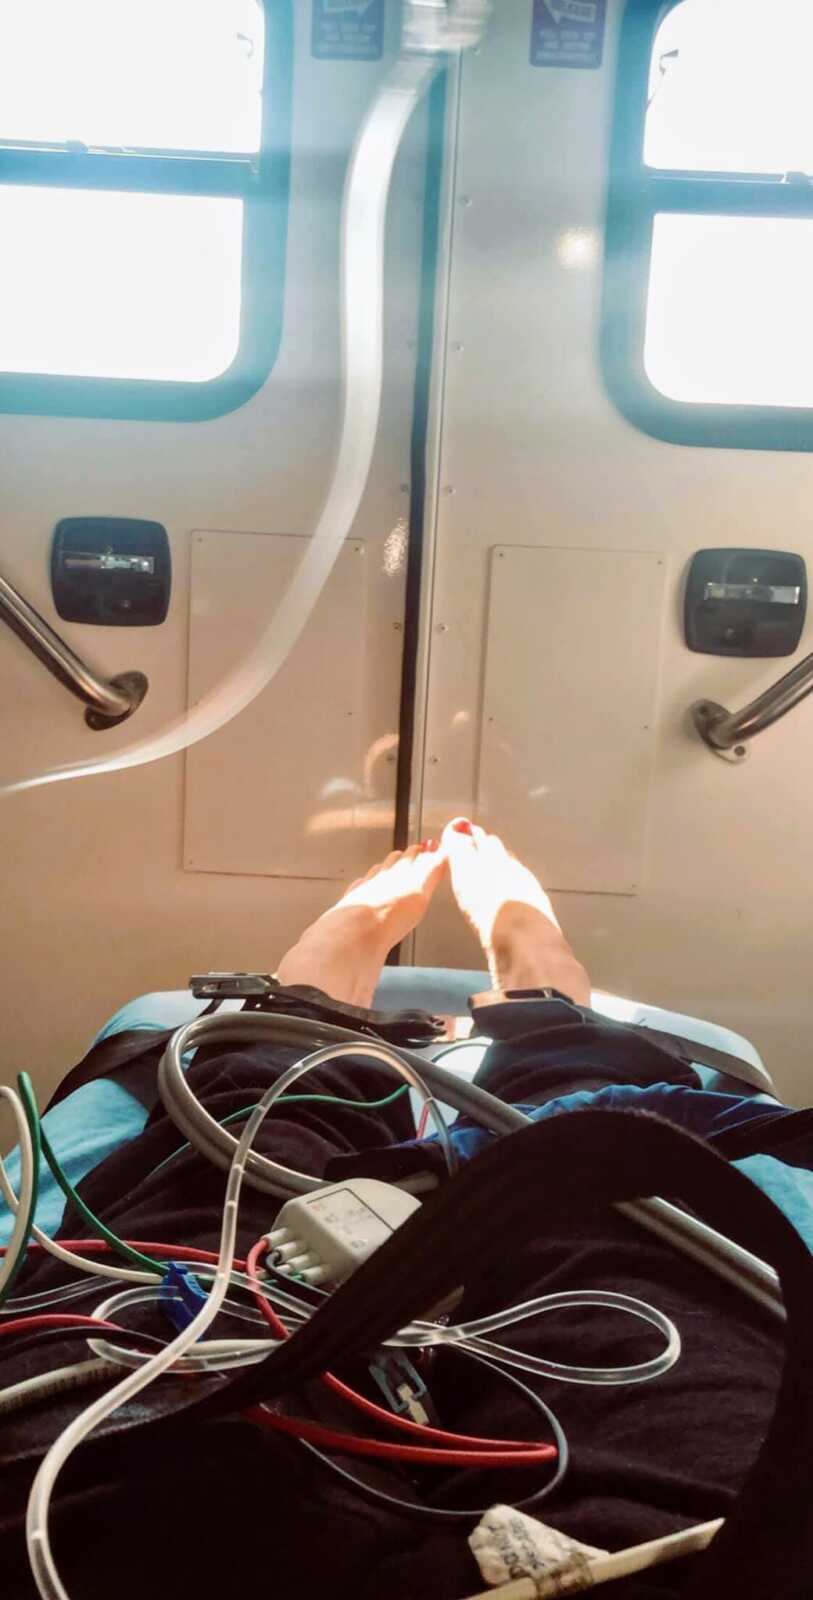 Woman suffering a severe panic attack from anxiety snaps a photo of her feet while laying down in an ambulance